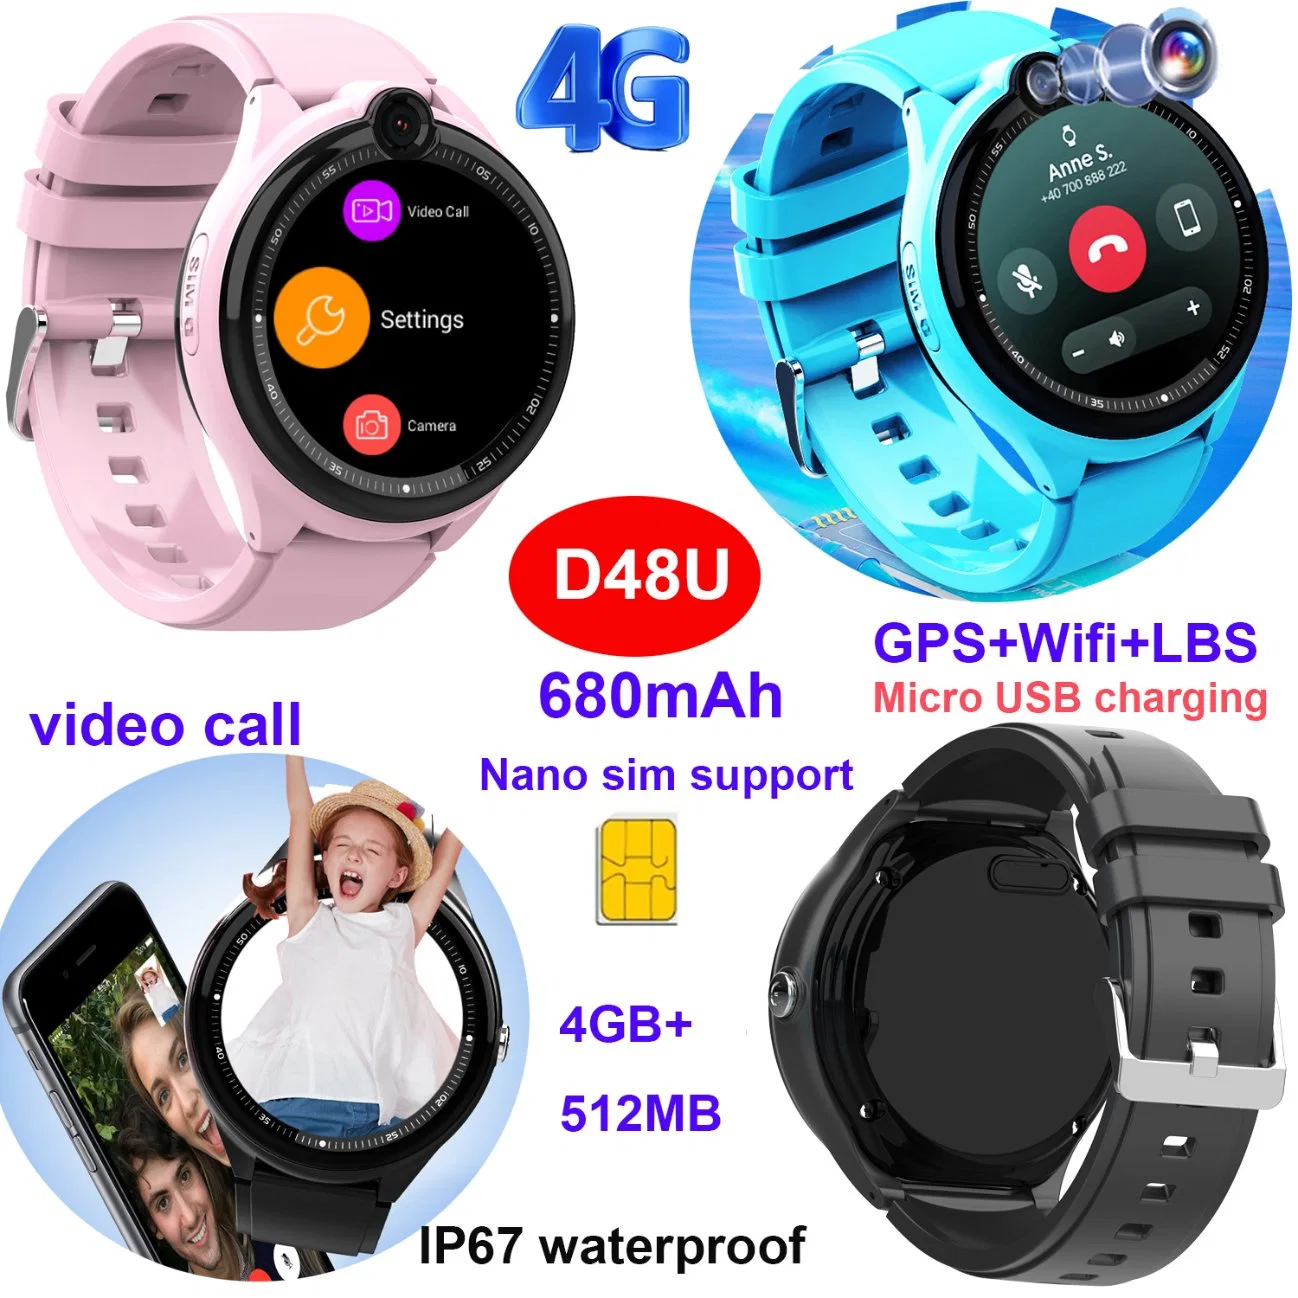 New Developed 4G LTE IP67 Waterproof Accurate positioning Video Call Child Smart Kids GPS Tracker Watch D48U